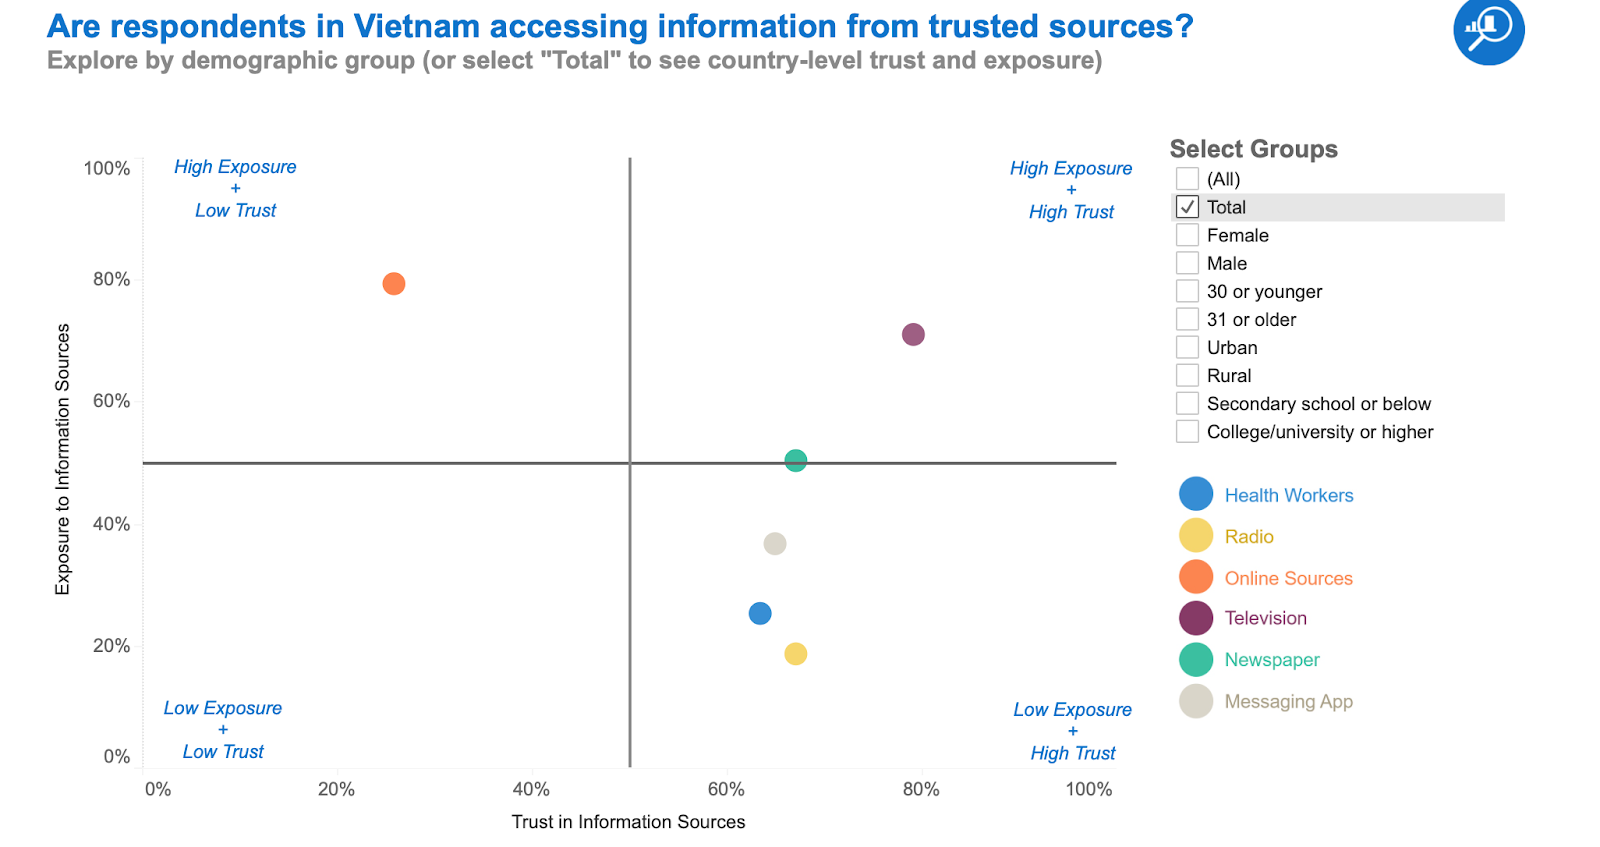 Are respondents in Vietnam accessing information from trusted sources?